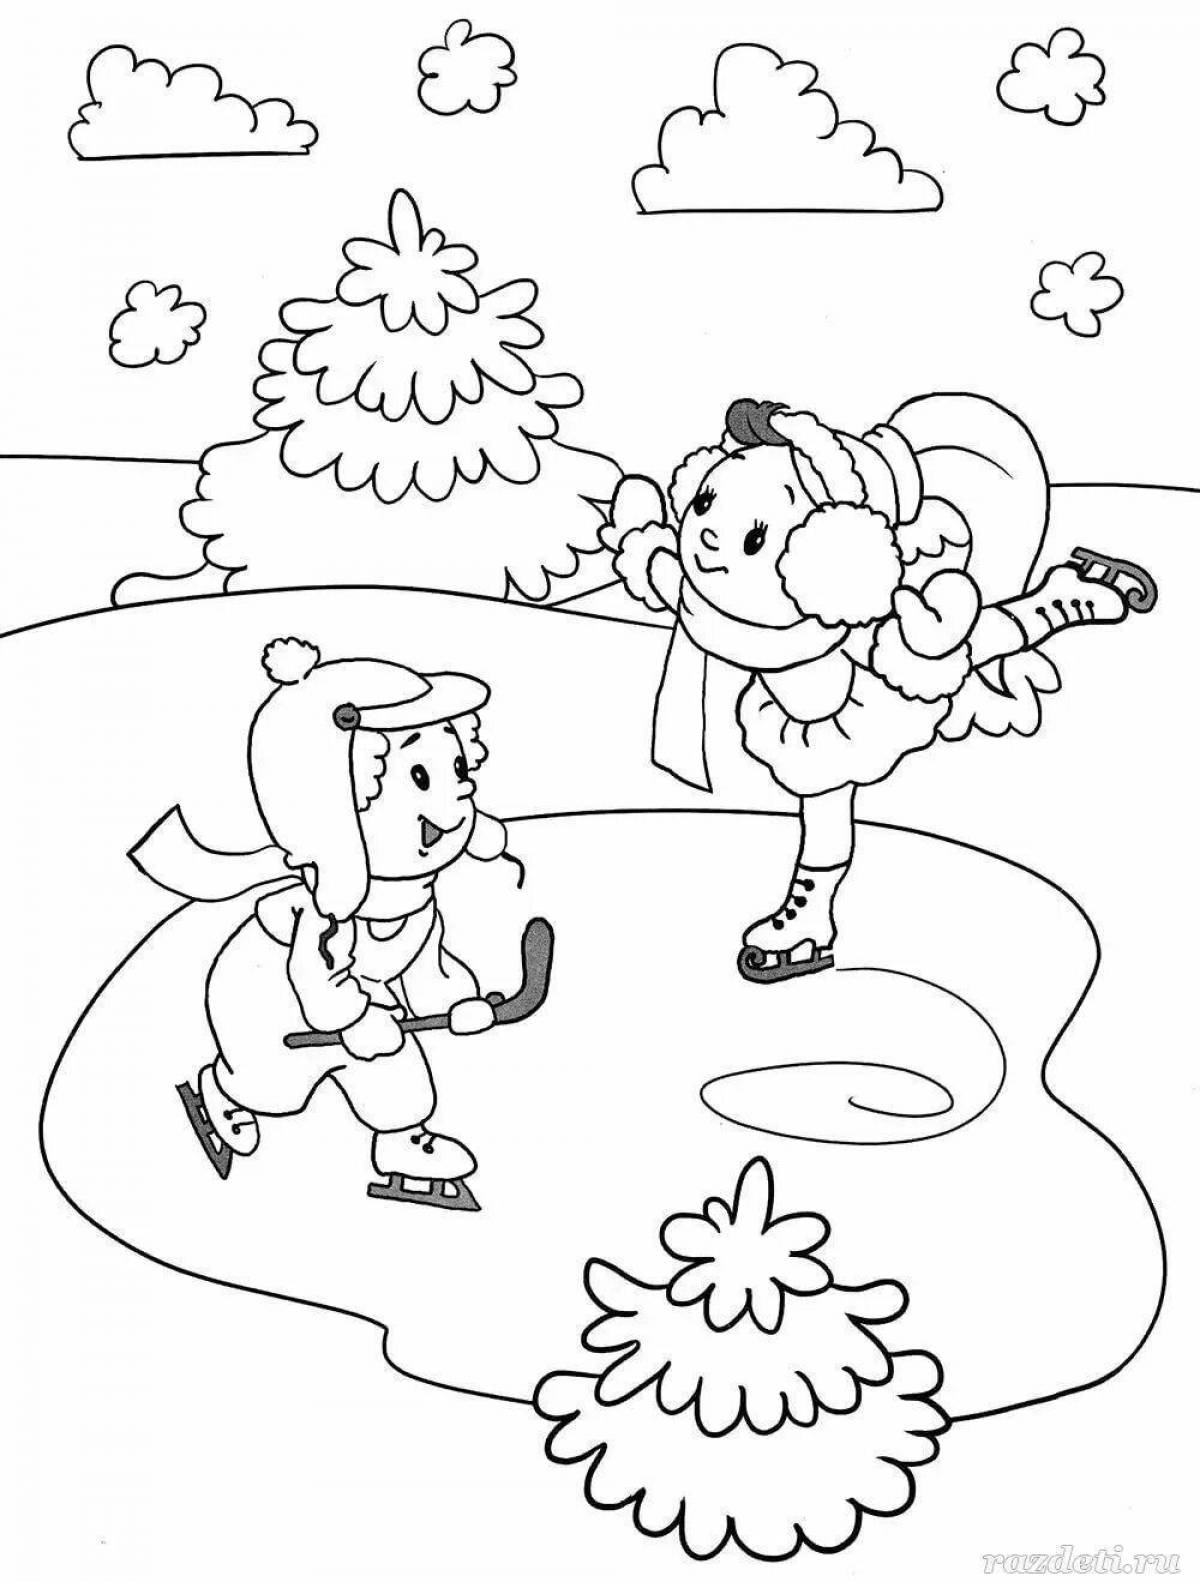 Fairy Winter Safety Coloring Page